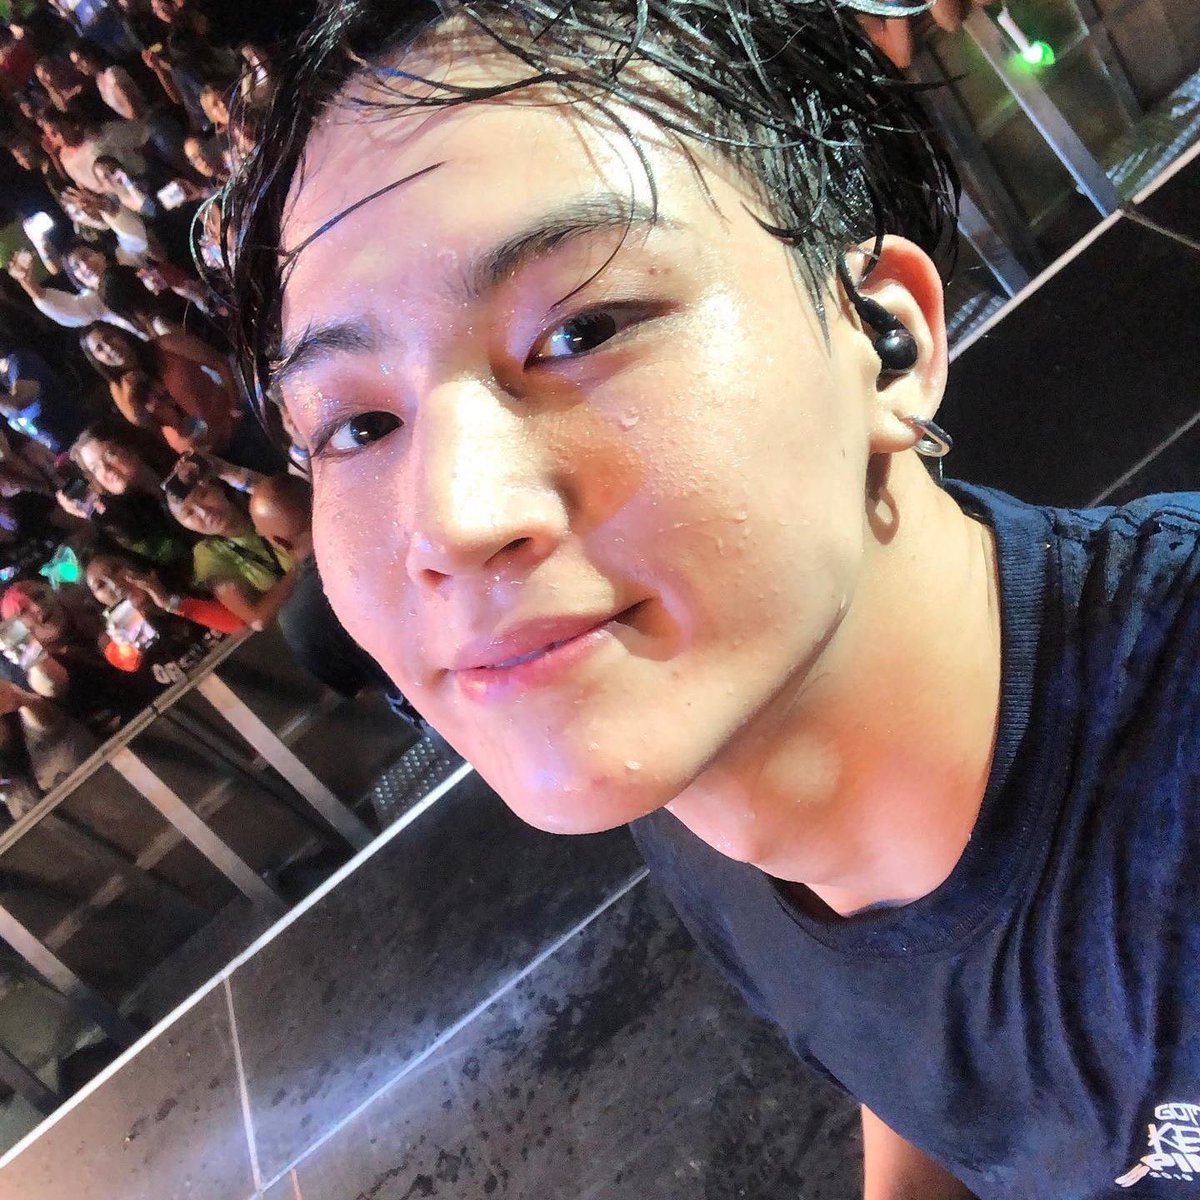 wet jaebeom: a quite long thread because that man sure does love to be soaking?? #GOT7    @got7official